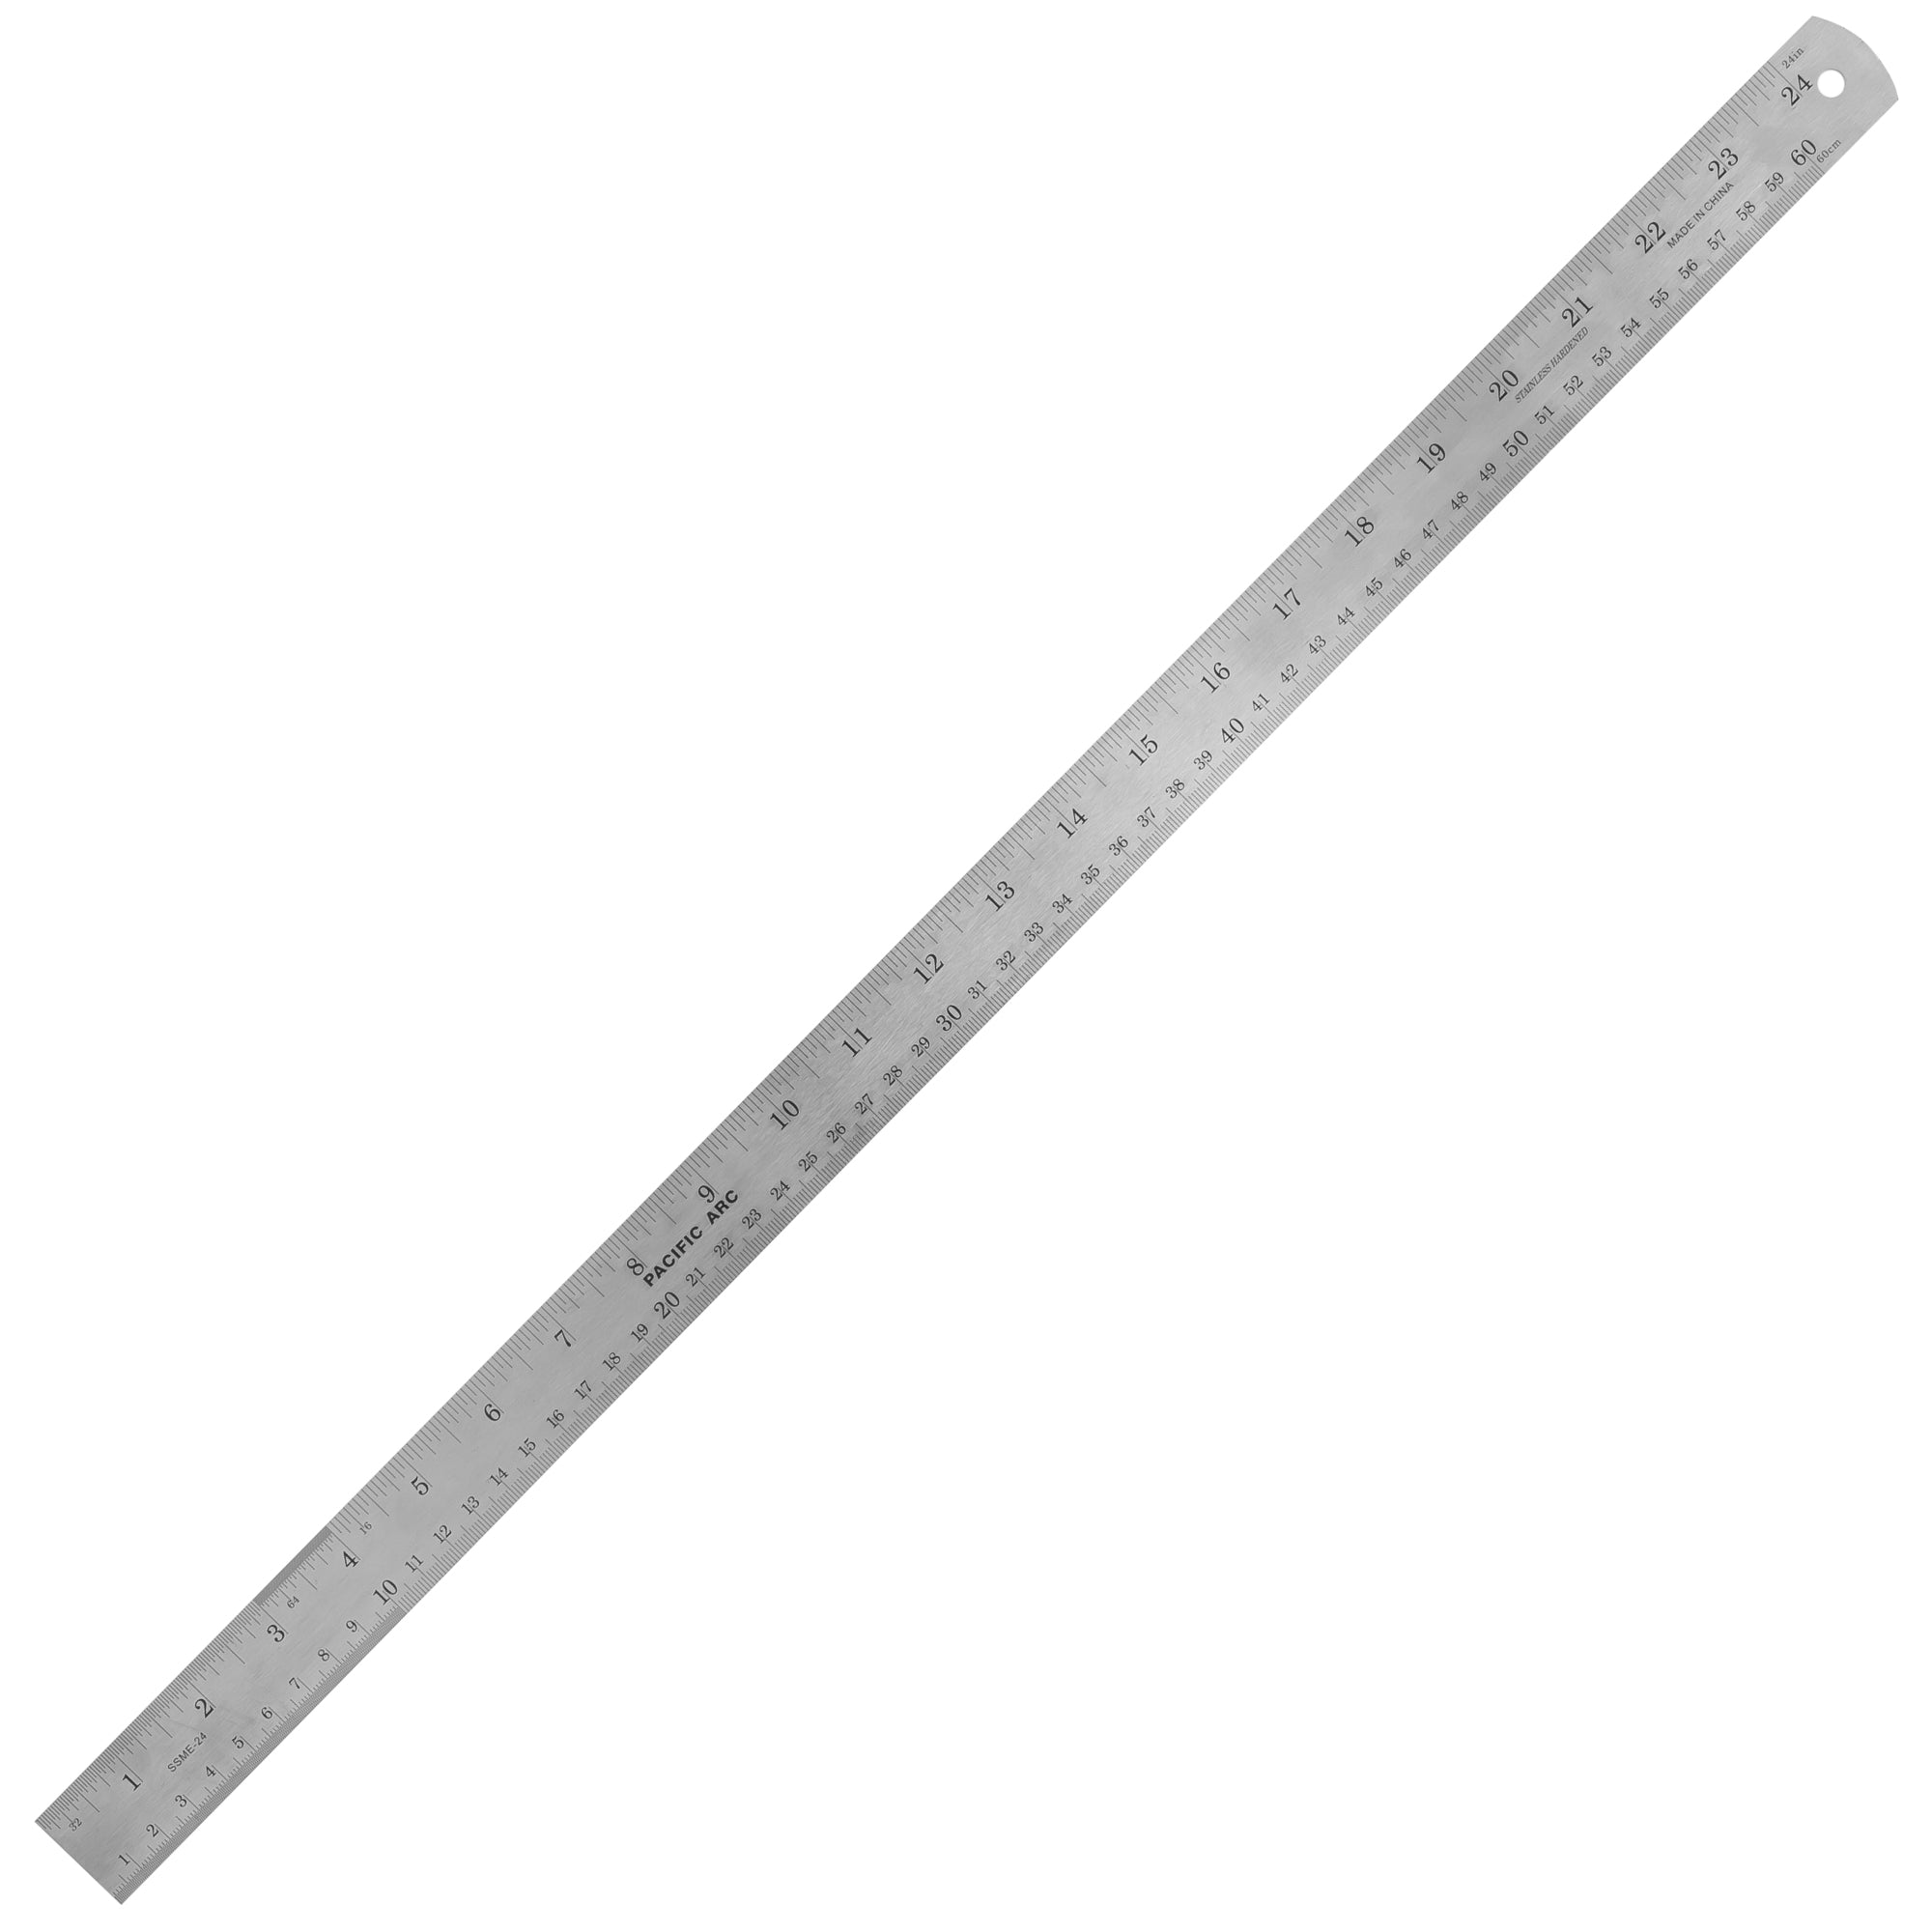 Stainless Steel Ruler (Pacific Arc)